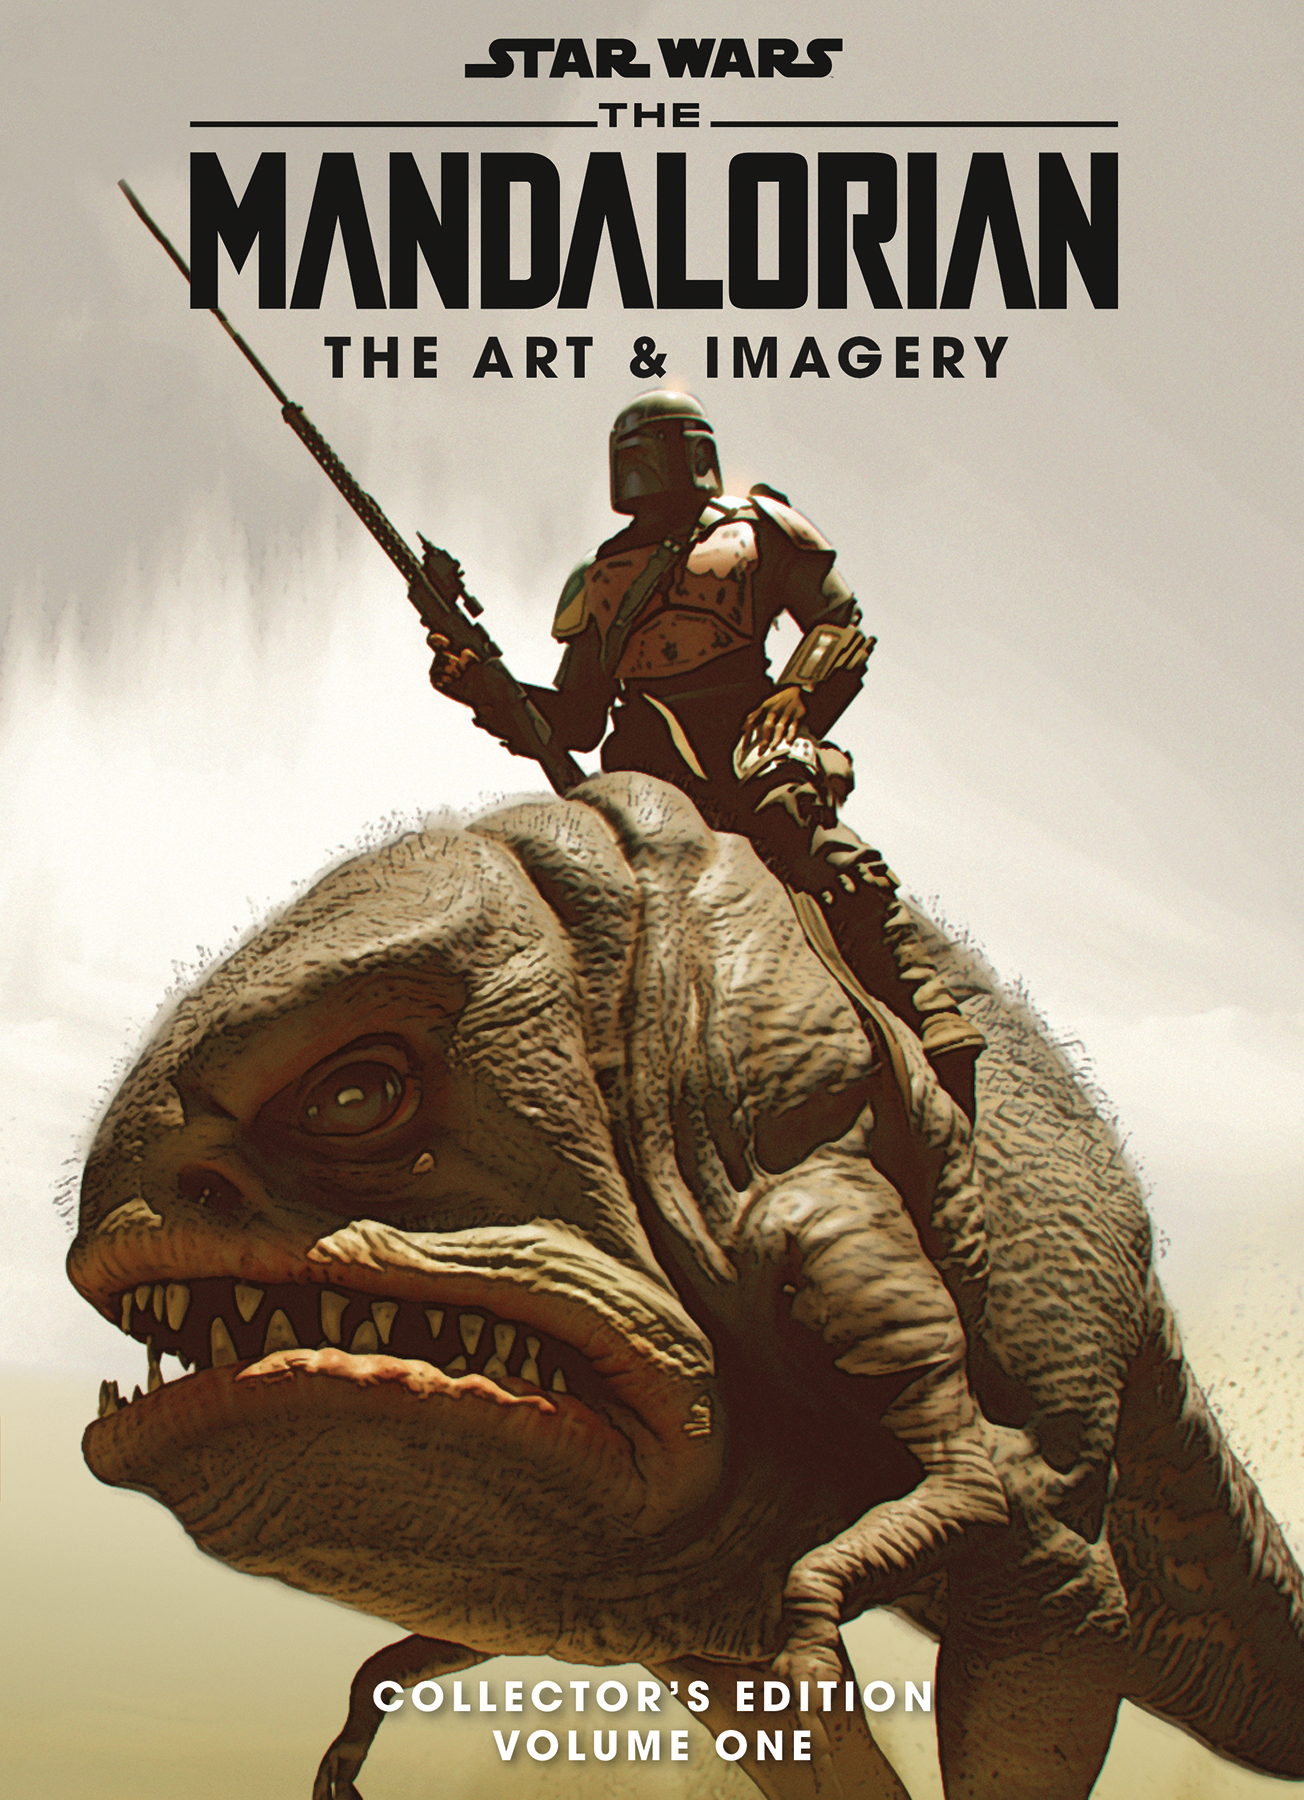 The Mandalorian: The Art & Imagery Collector’s Edition Volume 1 (Comic Store Cover) (26.05.2020)